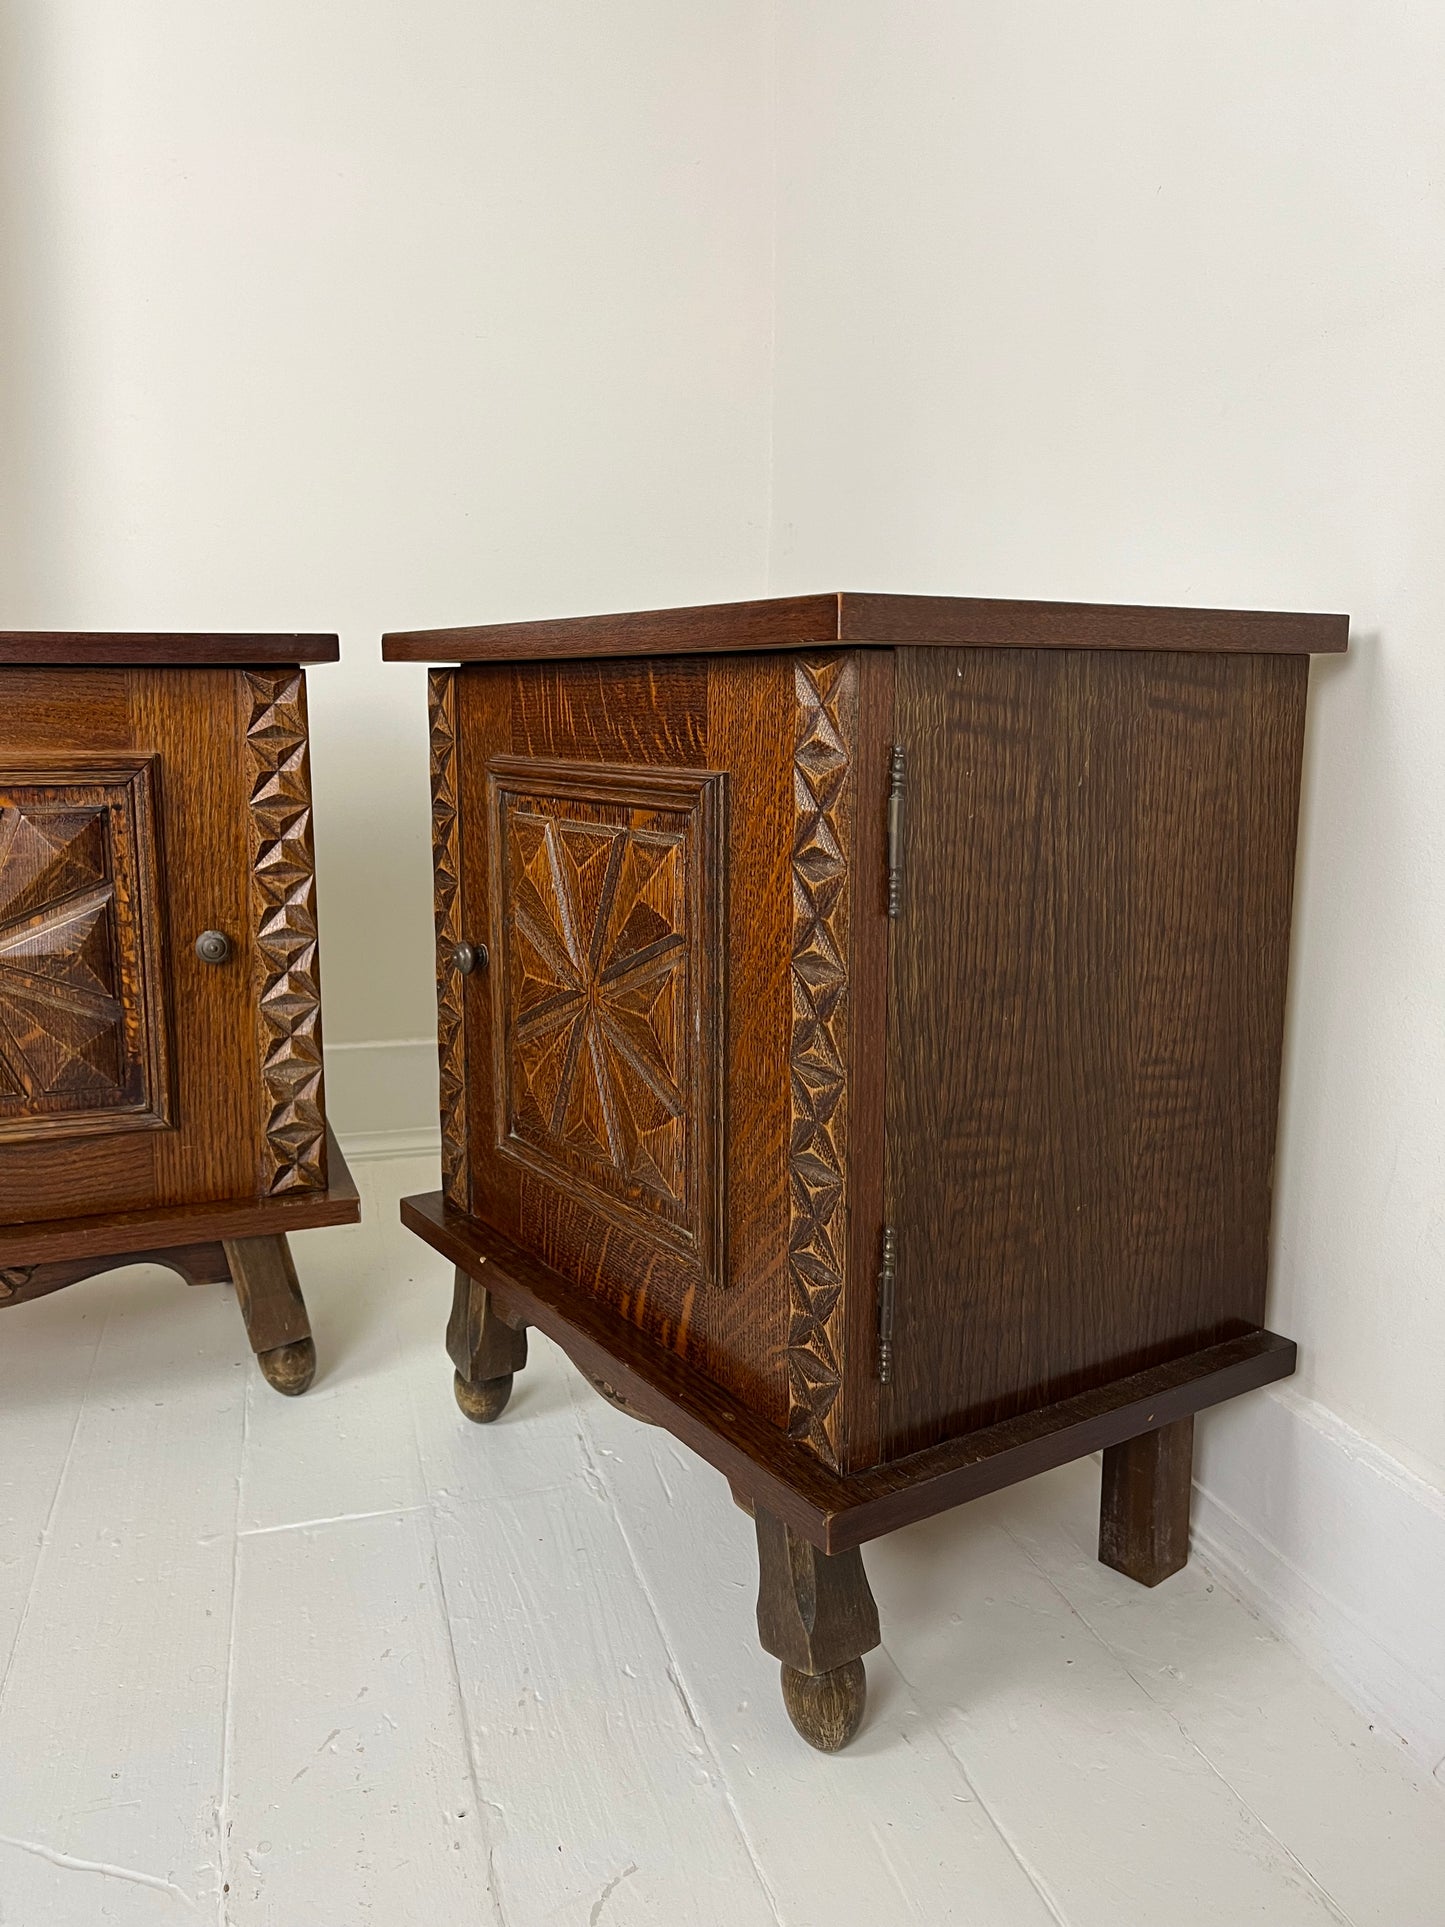 PAIR OF FRENCH BEDSIDE CABINETS